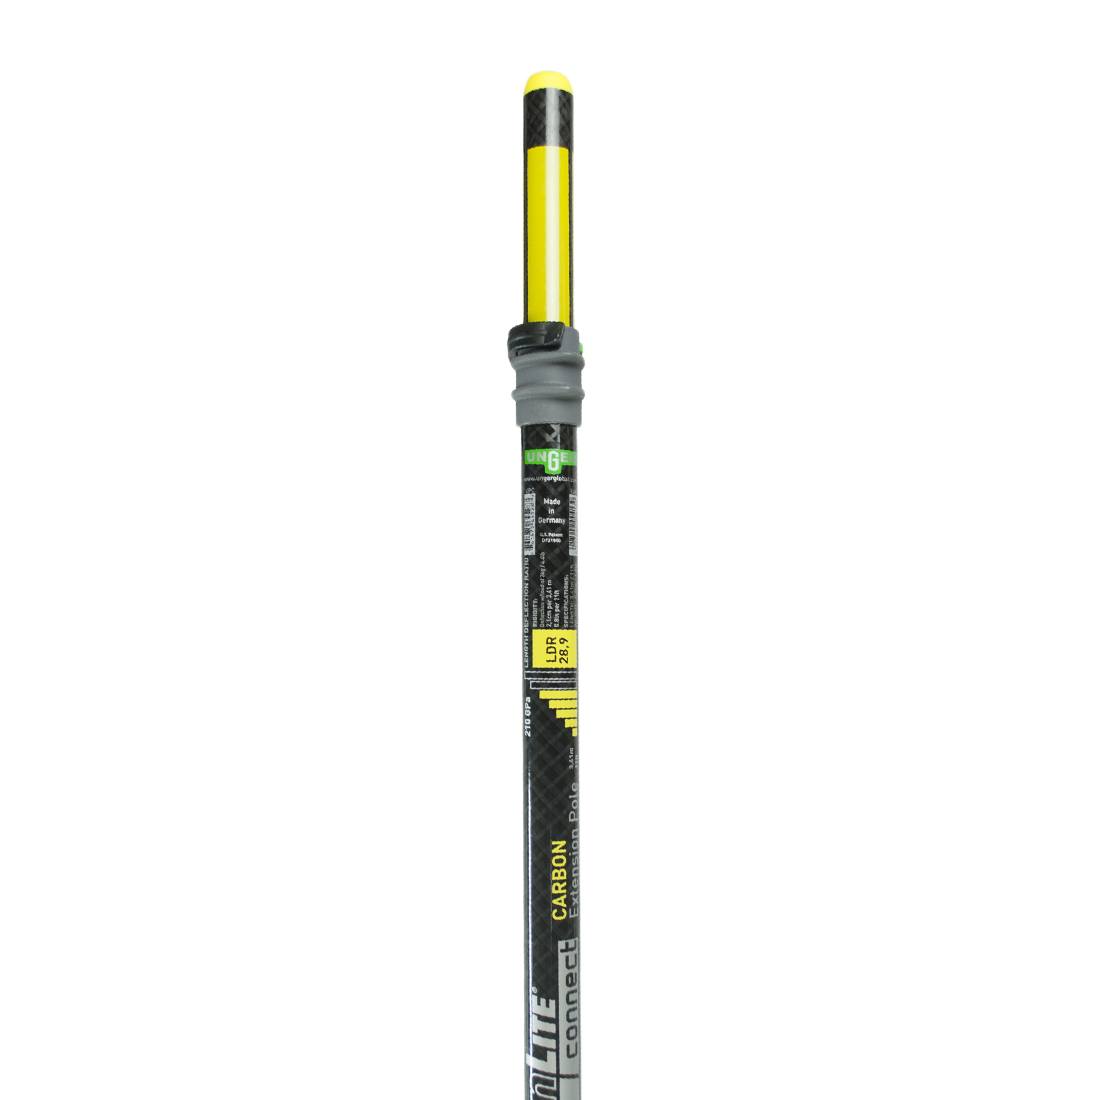 Unger nLite Carbon Extension Pole - 11 Foot - Top Section View